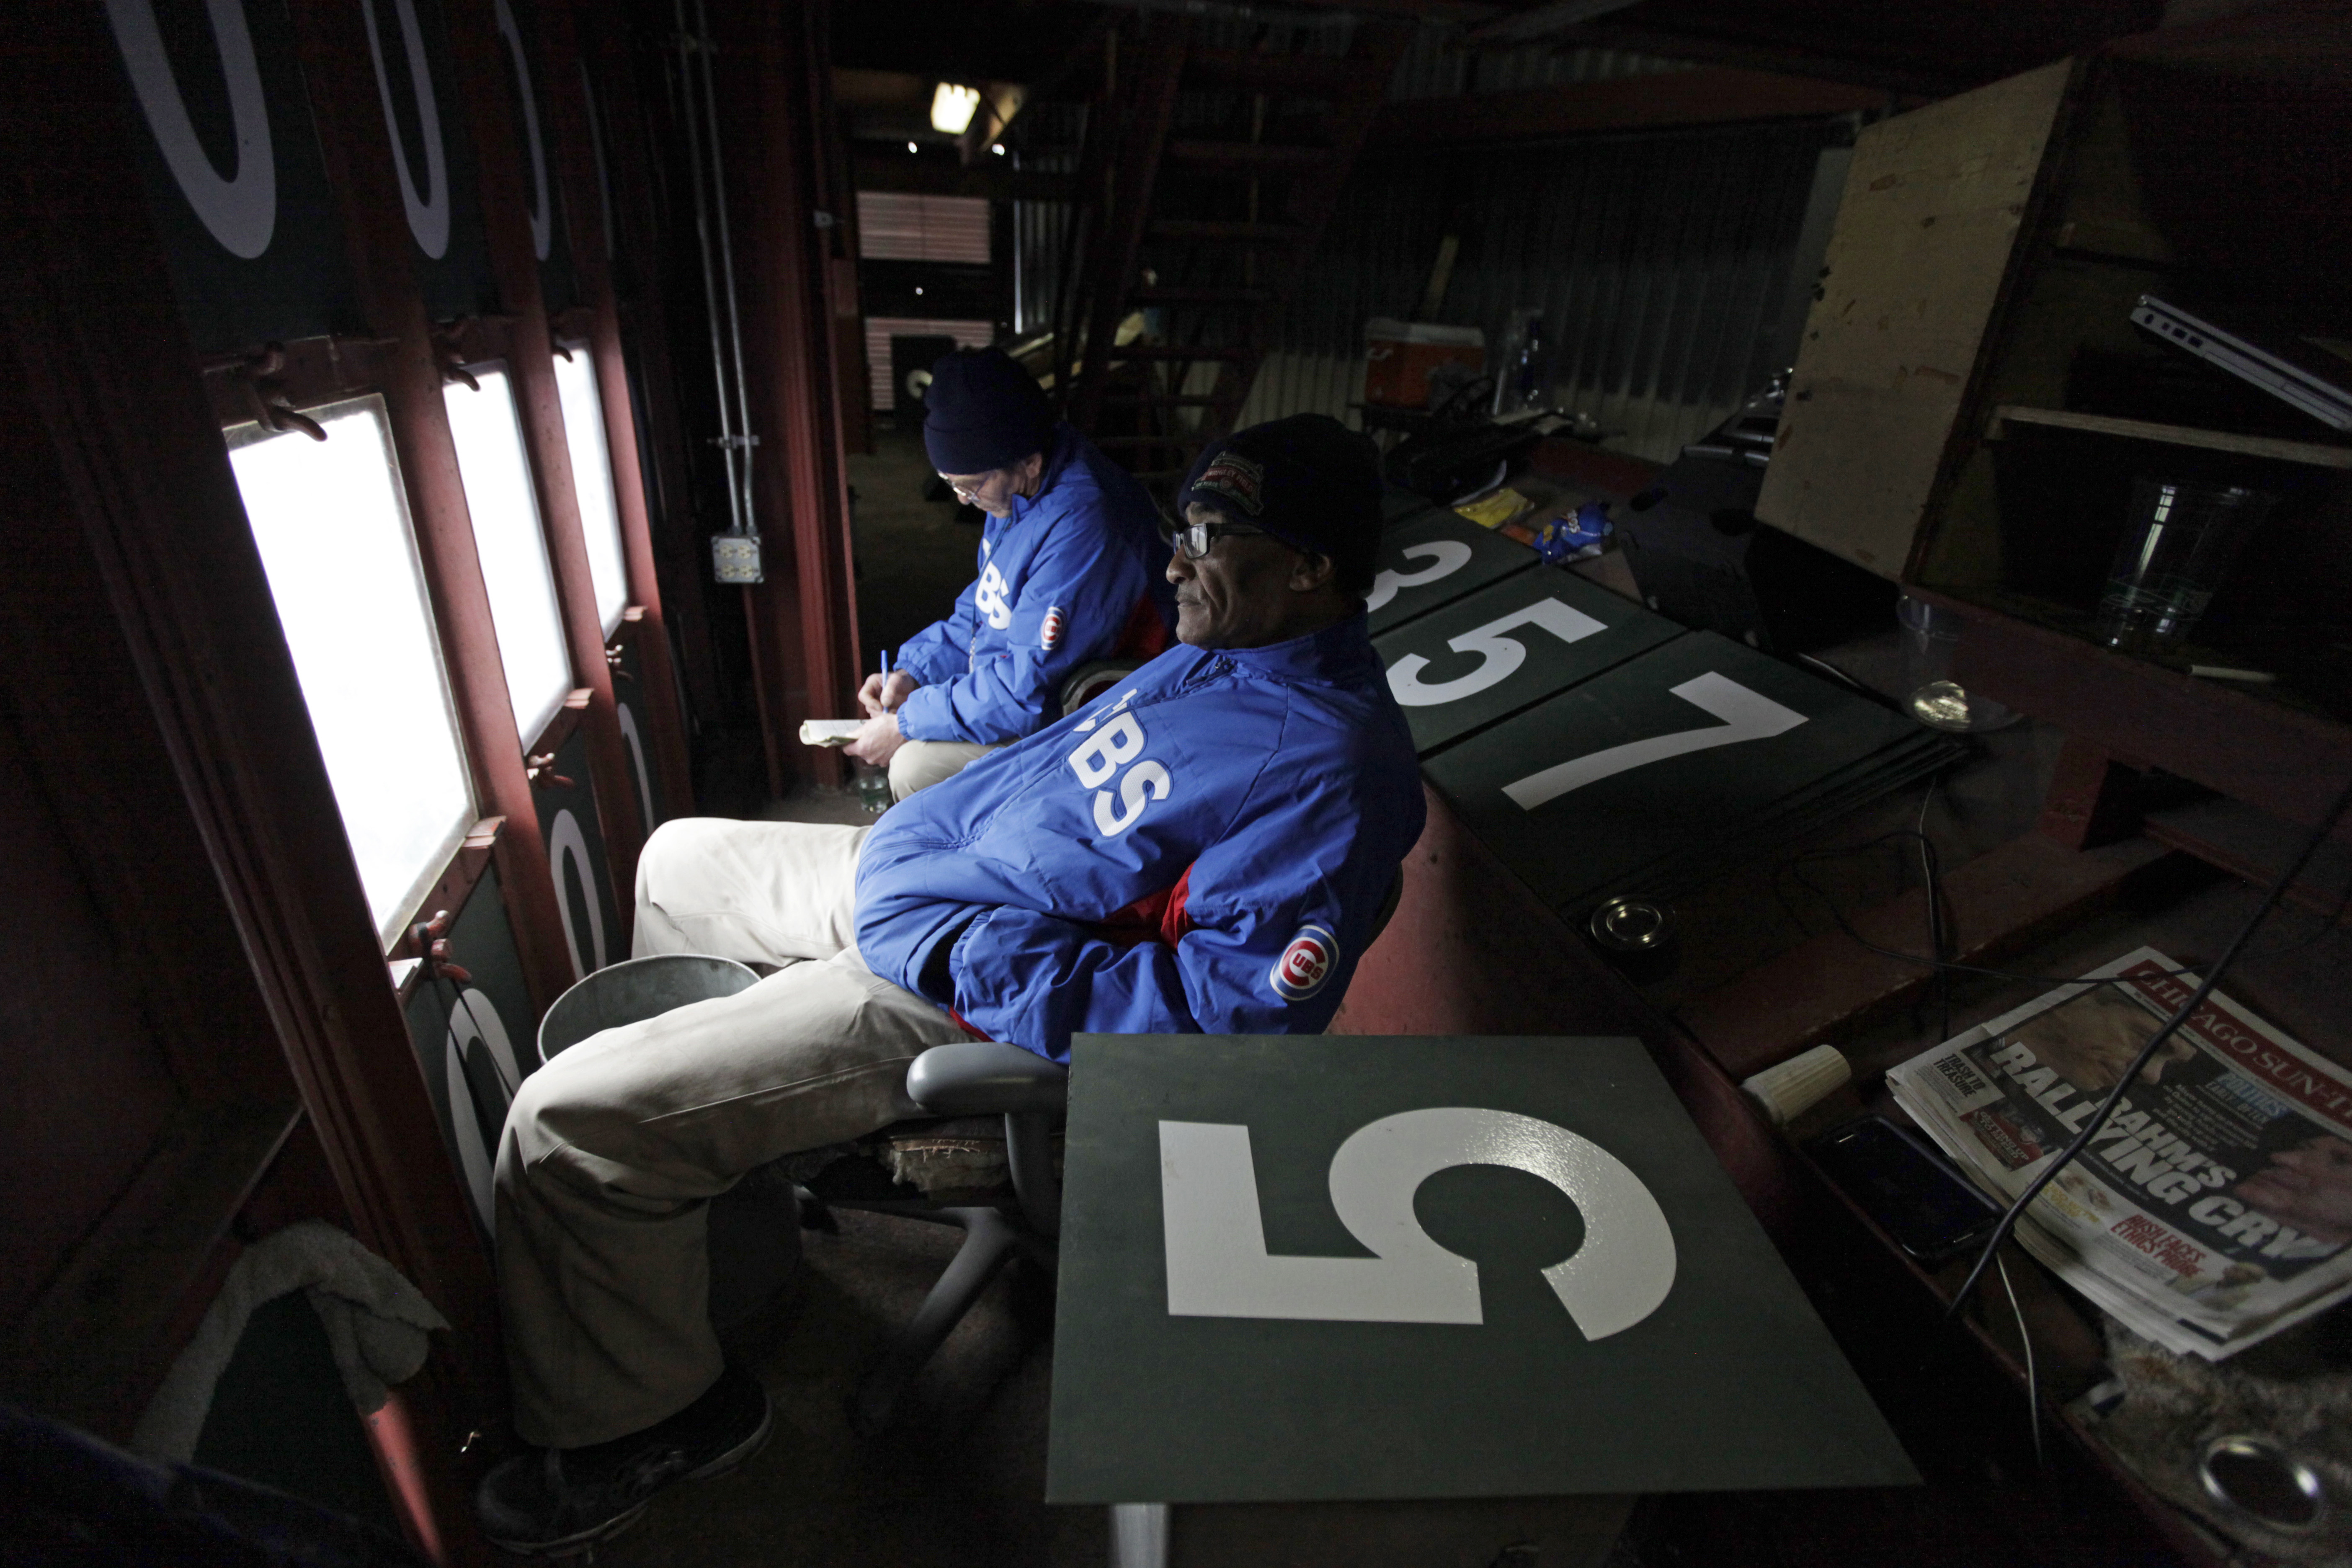 Scoreboard operators Fred Washington, right, and Brian Helmus look out to the field from inside of the scoreboard. (AP Photo/Kiichiro Sato)